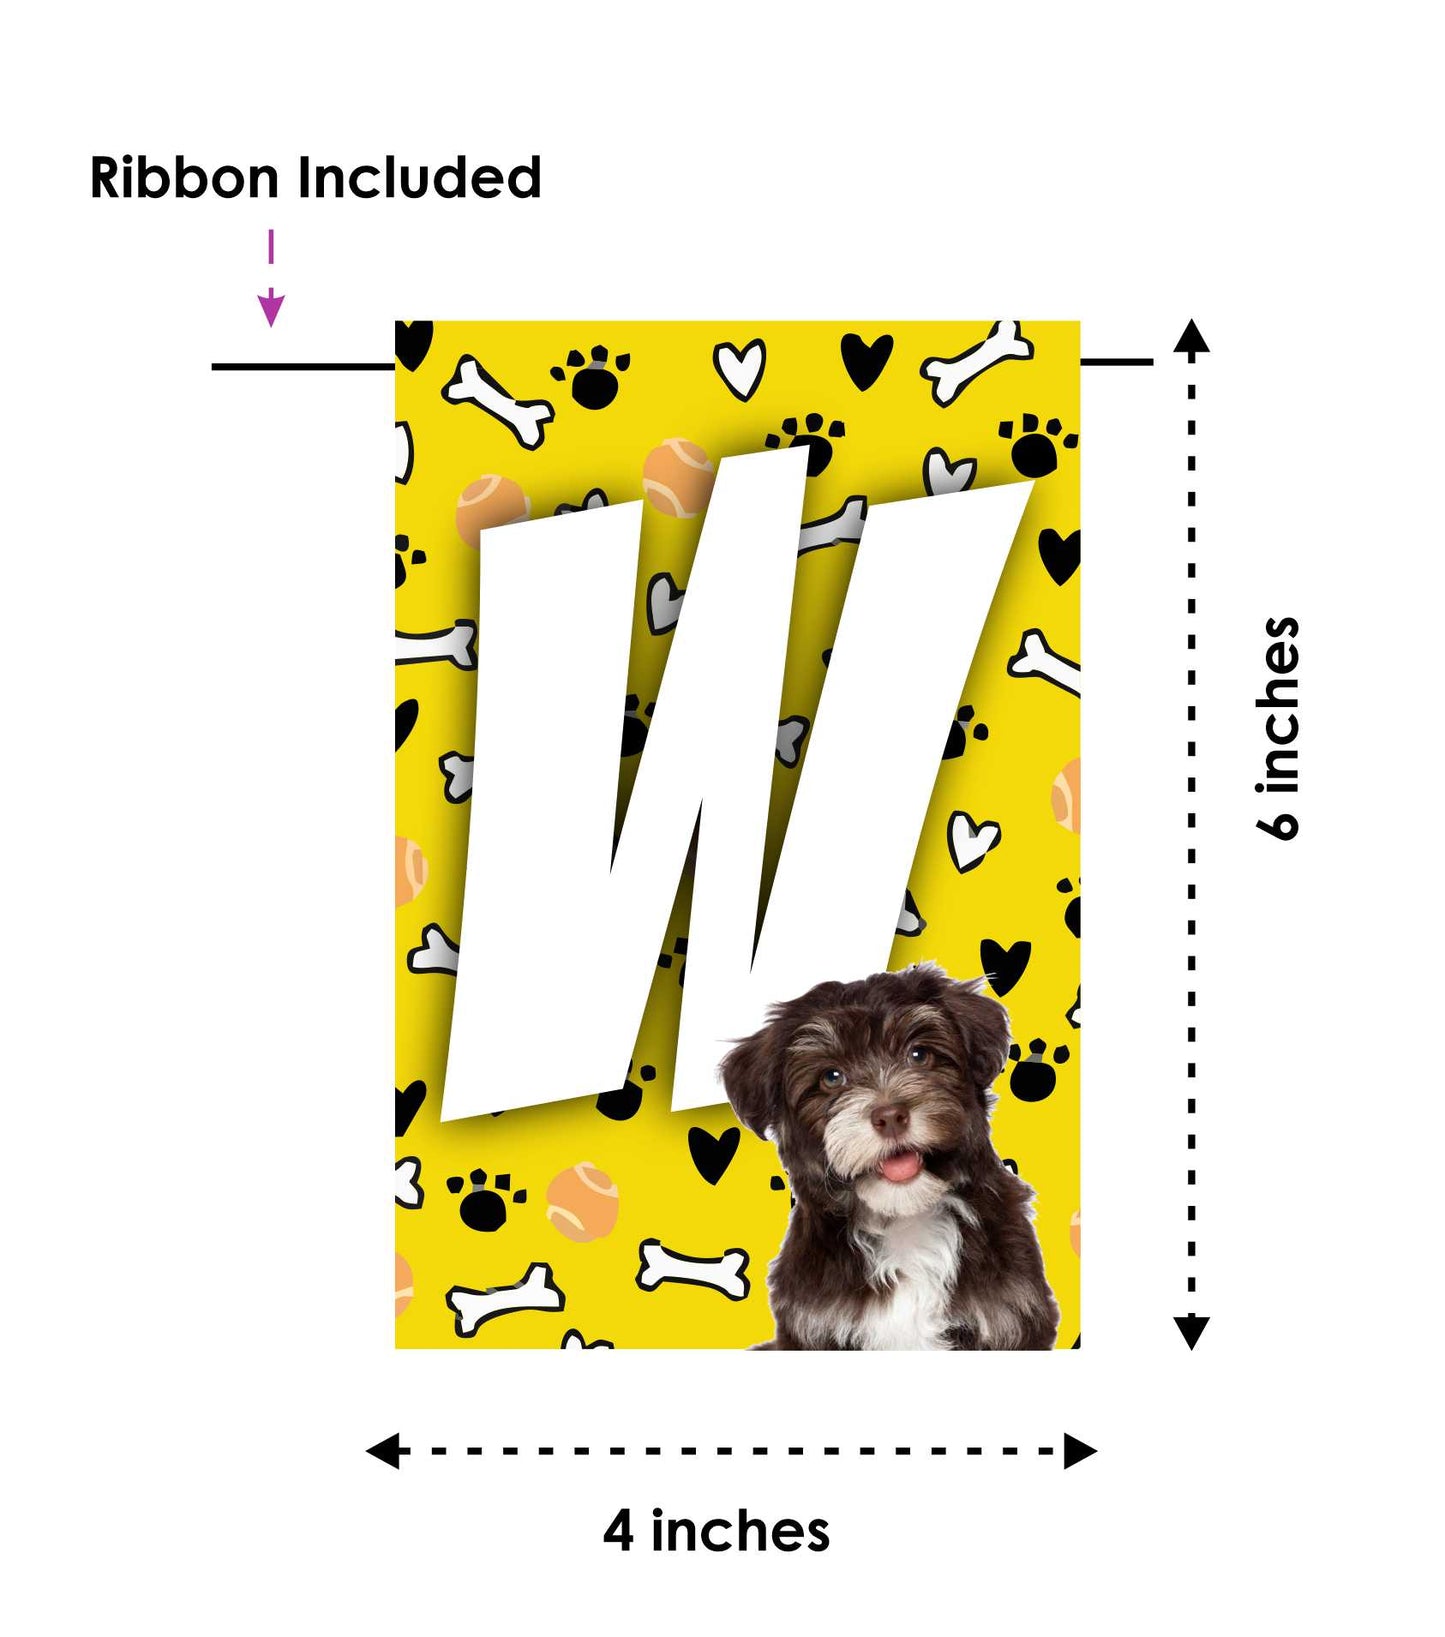 Dog Party Theme Welcome Banner for Party Entrance Home Welcoming Birthday Decoration Party Item